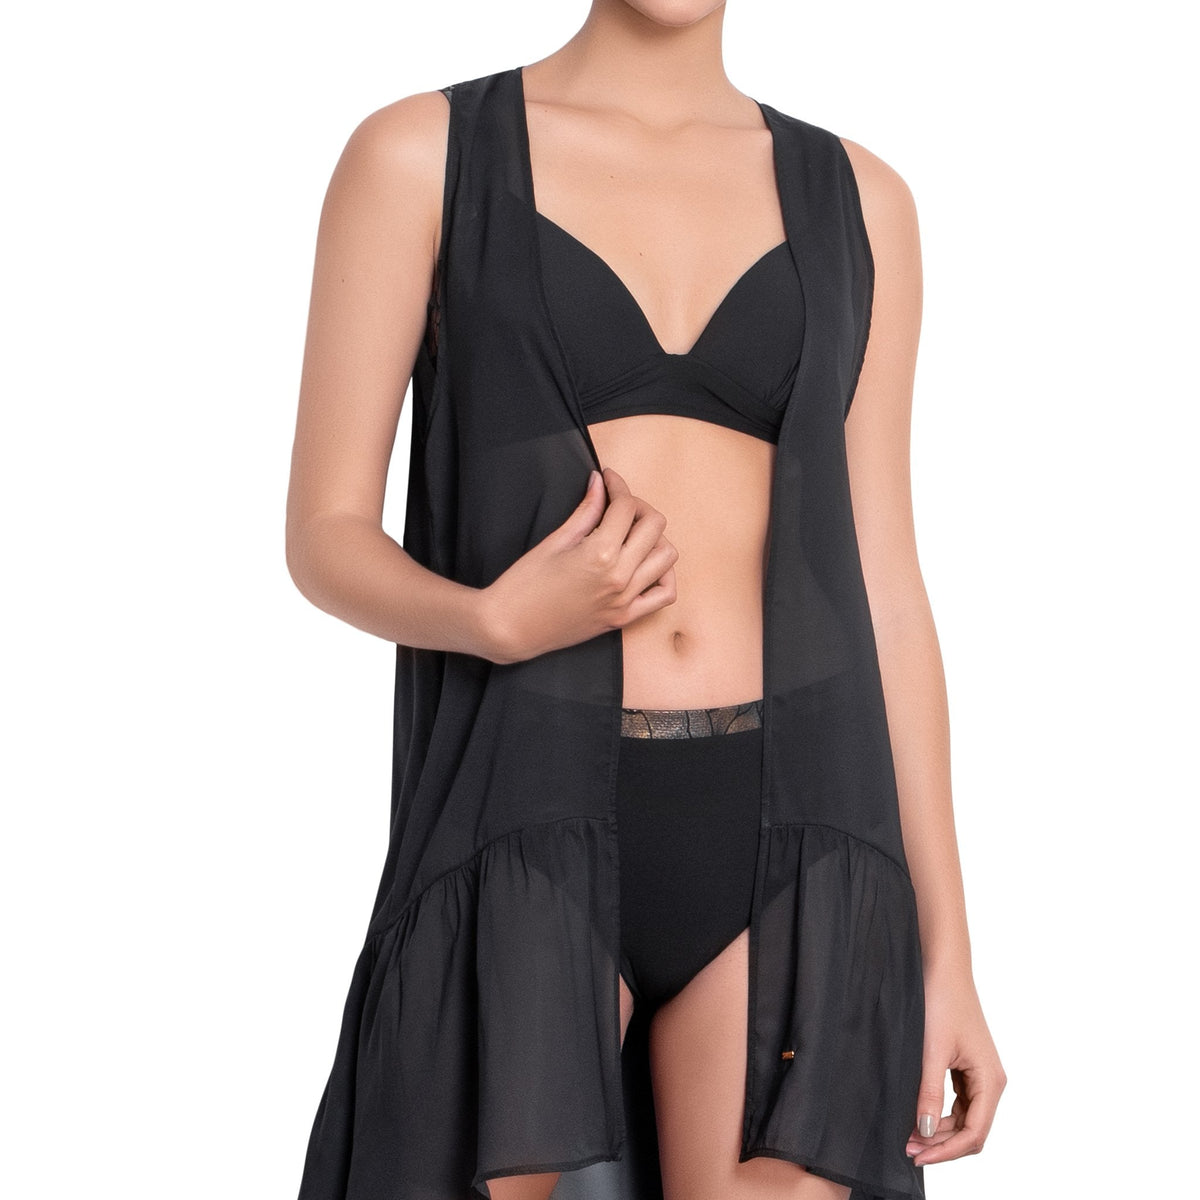 ISABELLE long back dress, black chiffon cover up by ALMA swimwear ‚Äì front view 1